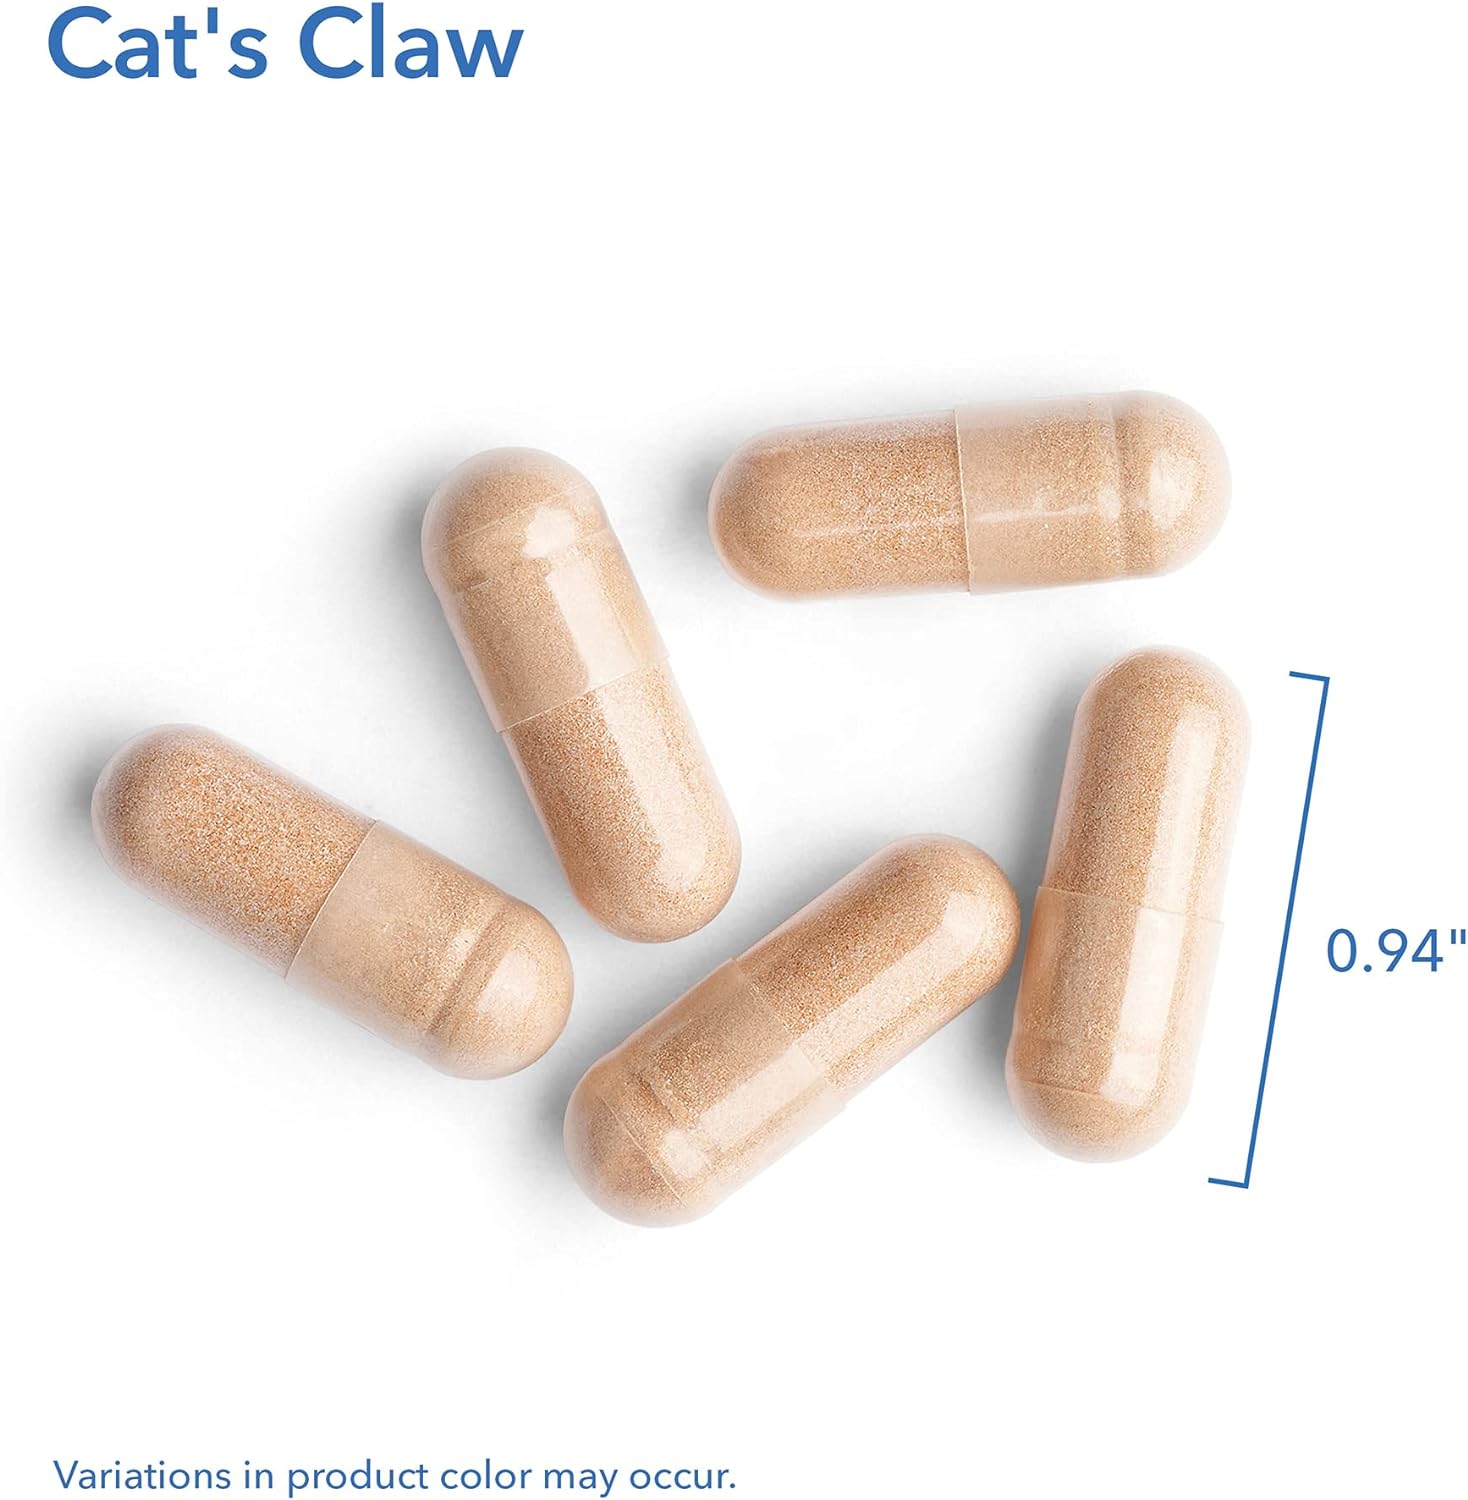 Allergy Research Group - Cat's Claw, 60 Caps